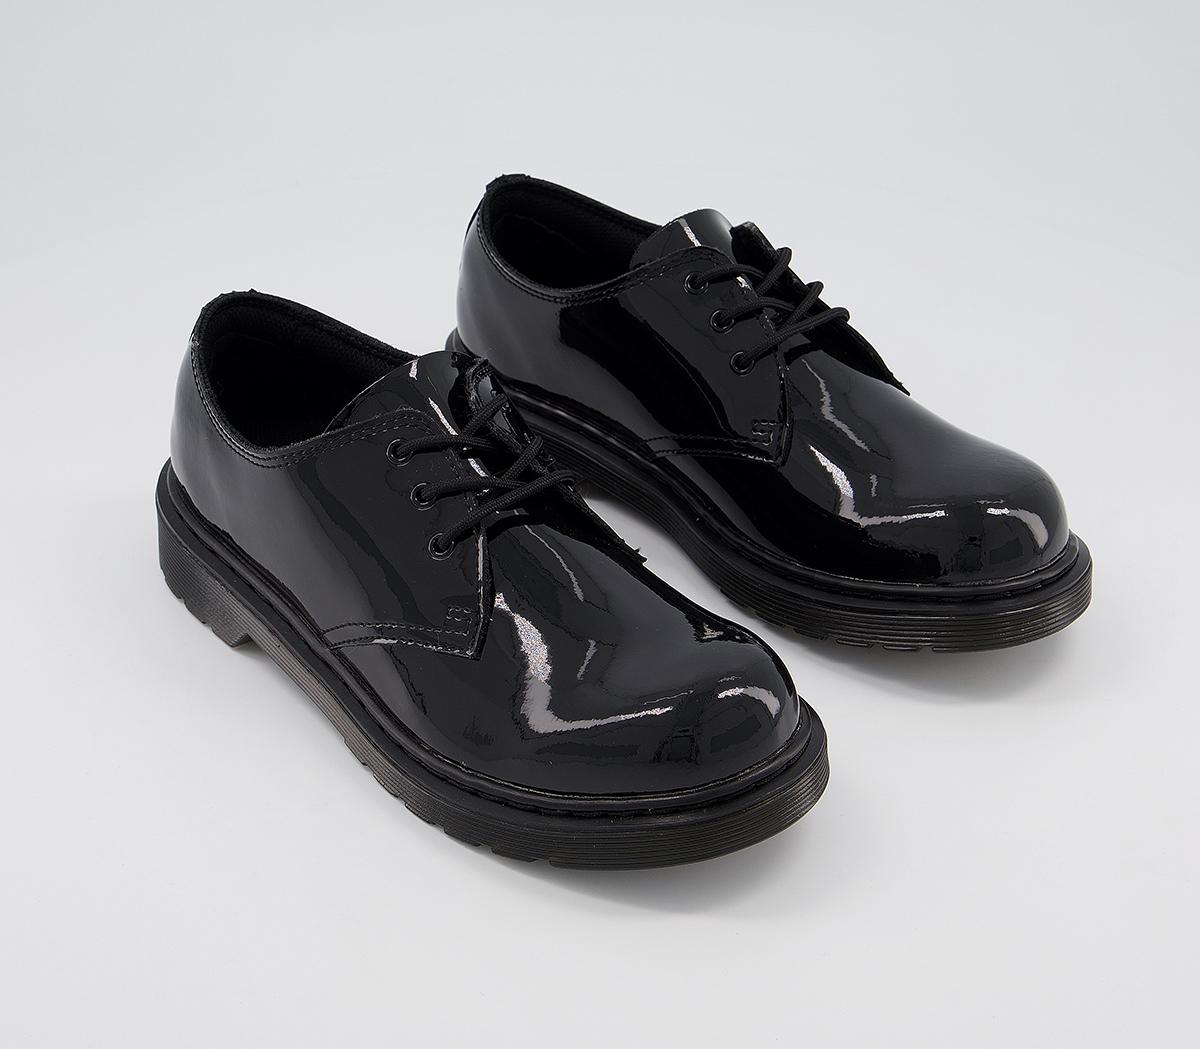 Dr. Martens 1461 3 Eye Youth Shoes Black Patent - Flat Shoes for Women